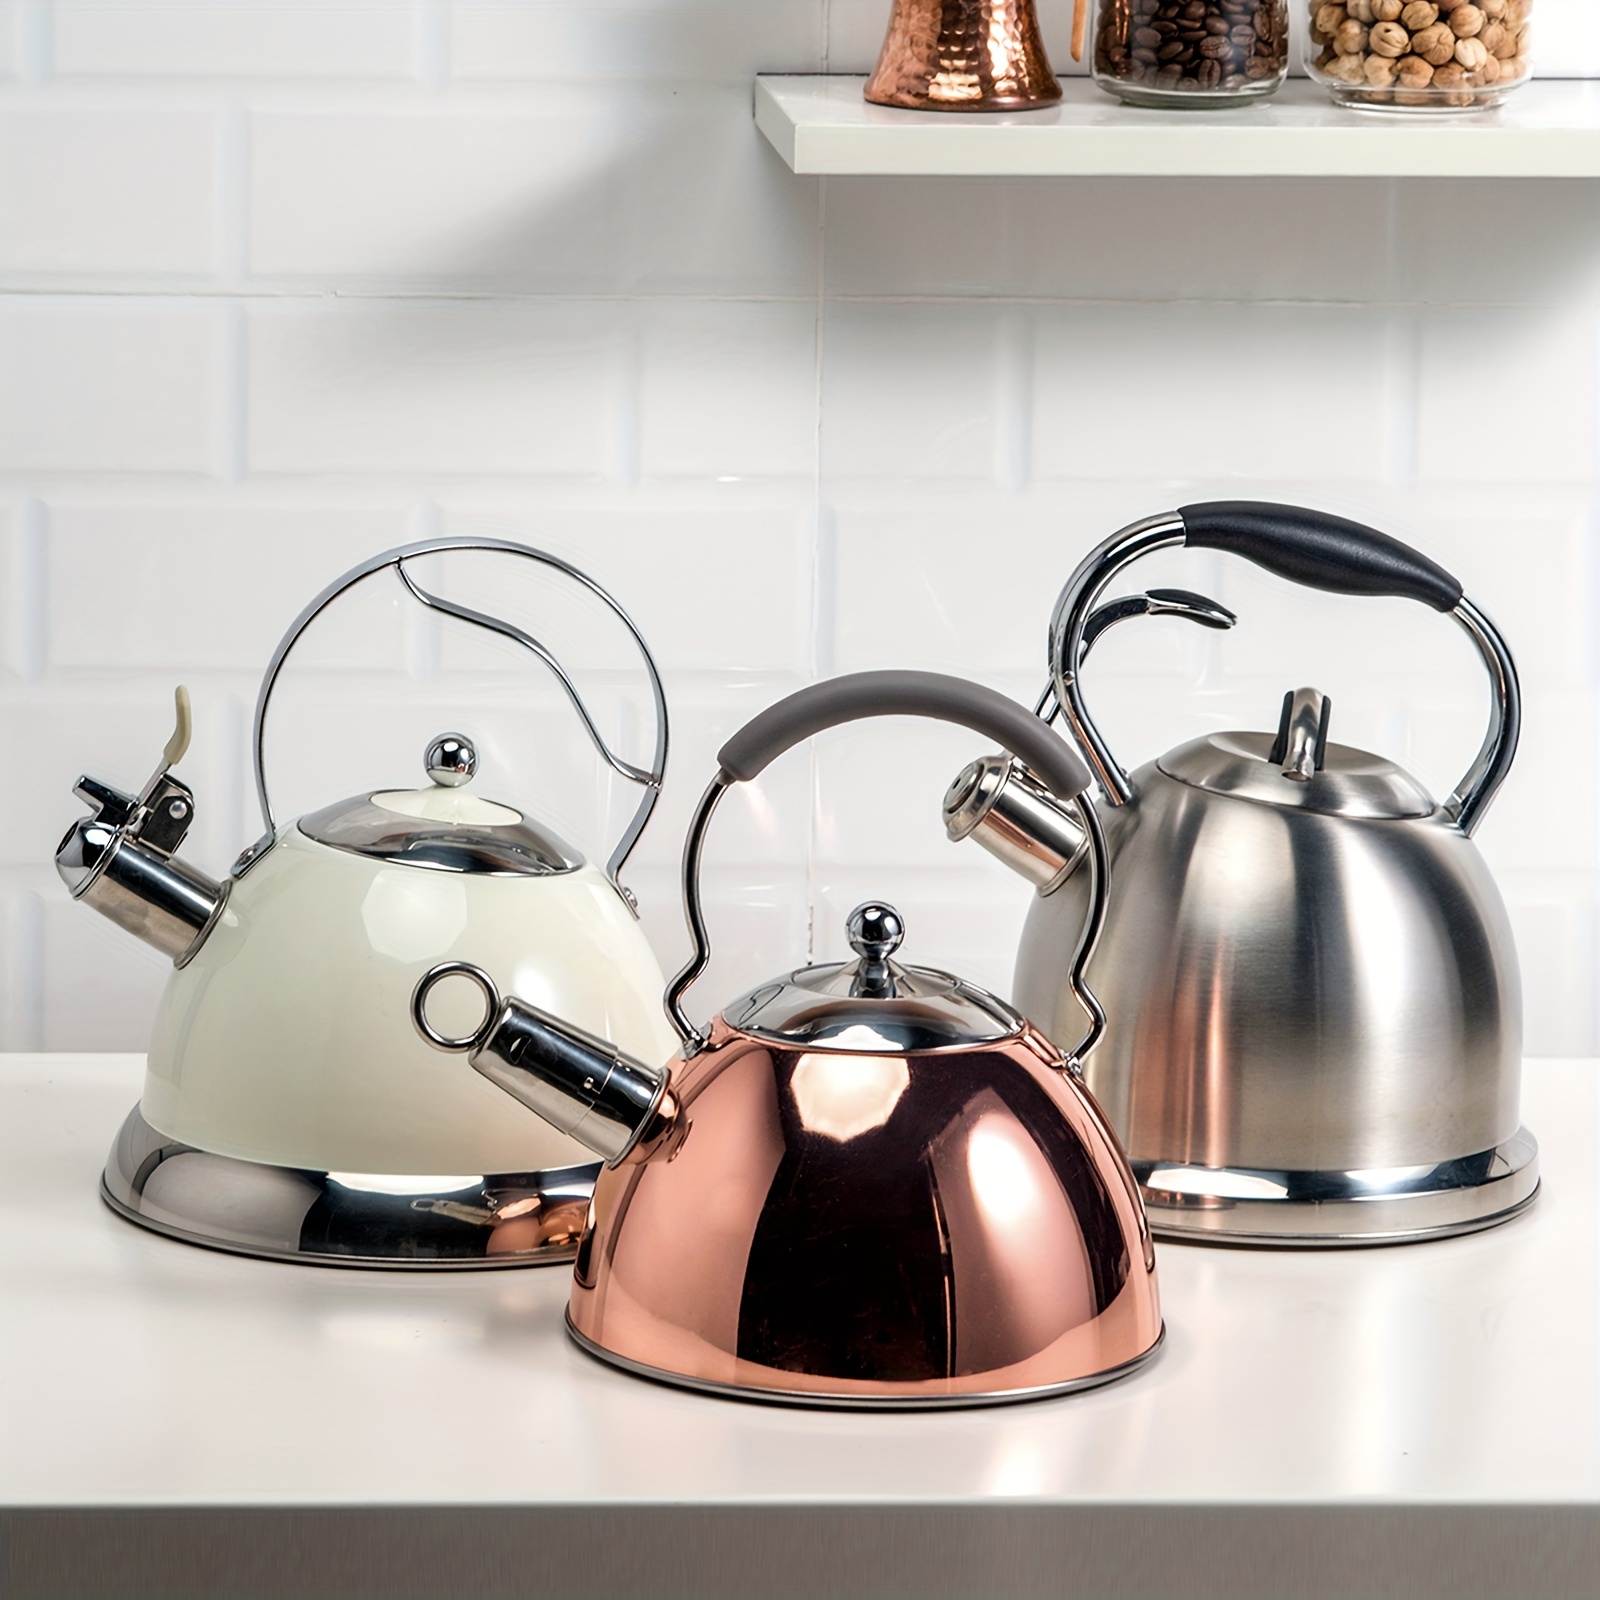 Tea Kettles: Prepare the perfect cup of tea with tea kettles for gas stoves